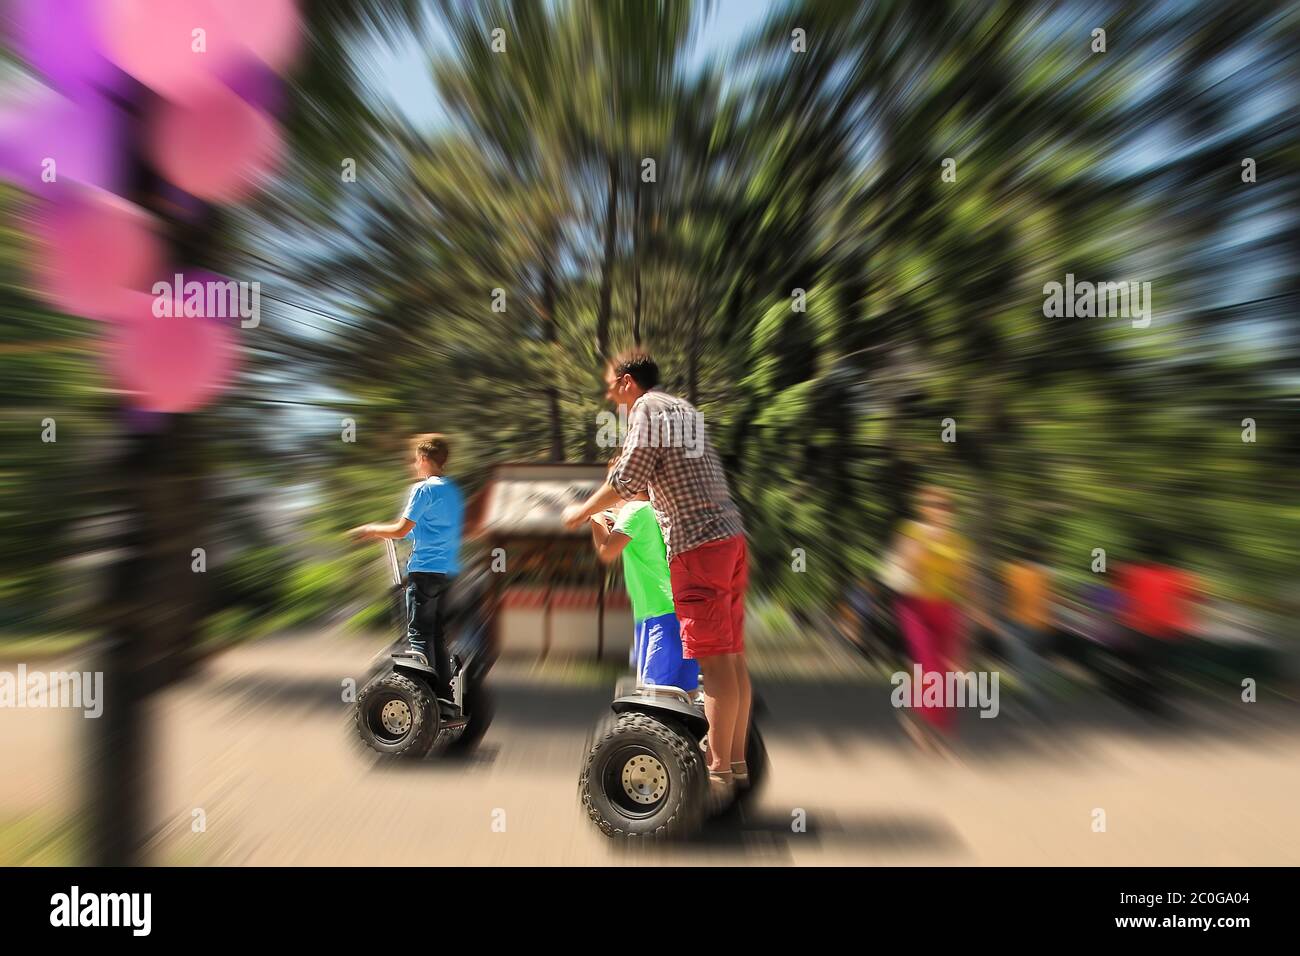 Abstract background. Father and children riding a Segway in the park.  Blur effect defocusing filter applied. Stock Photo